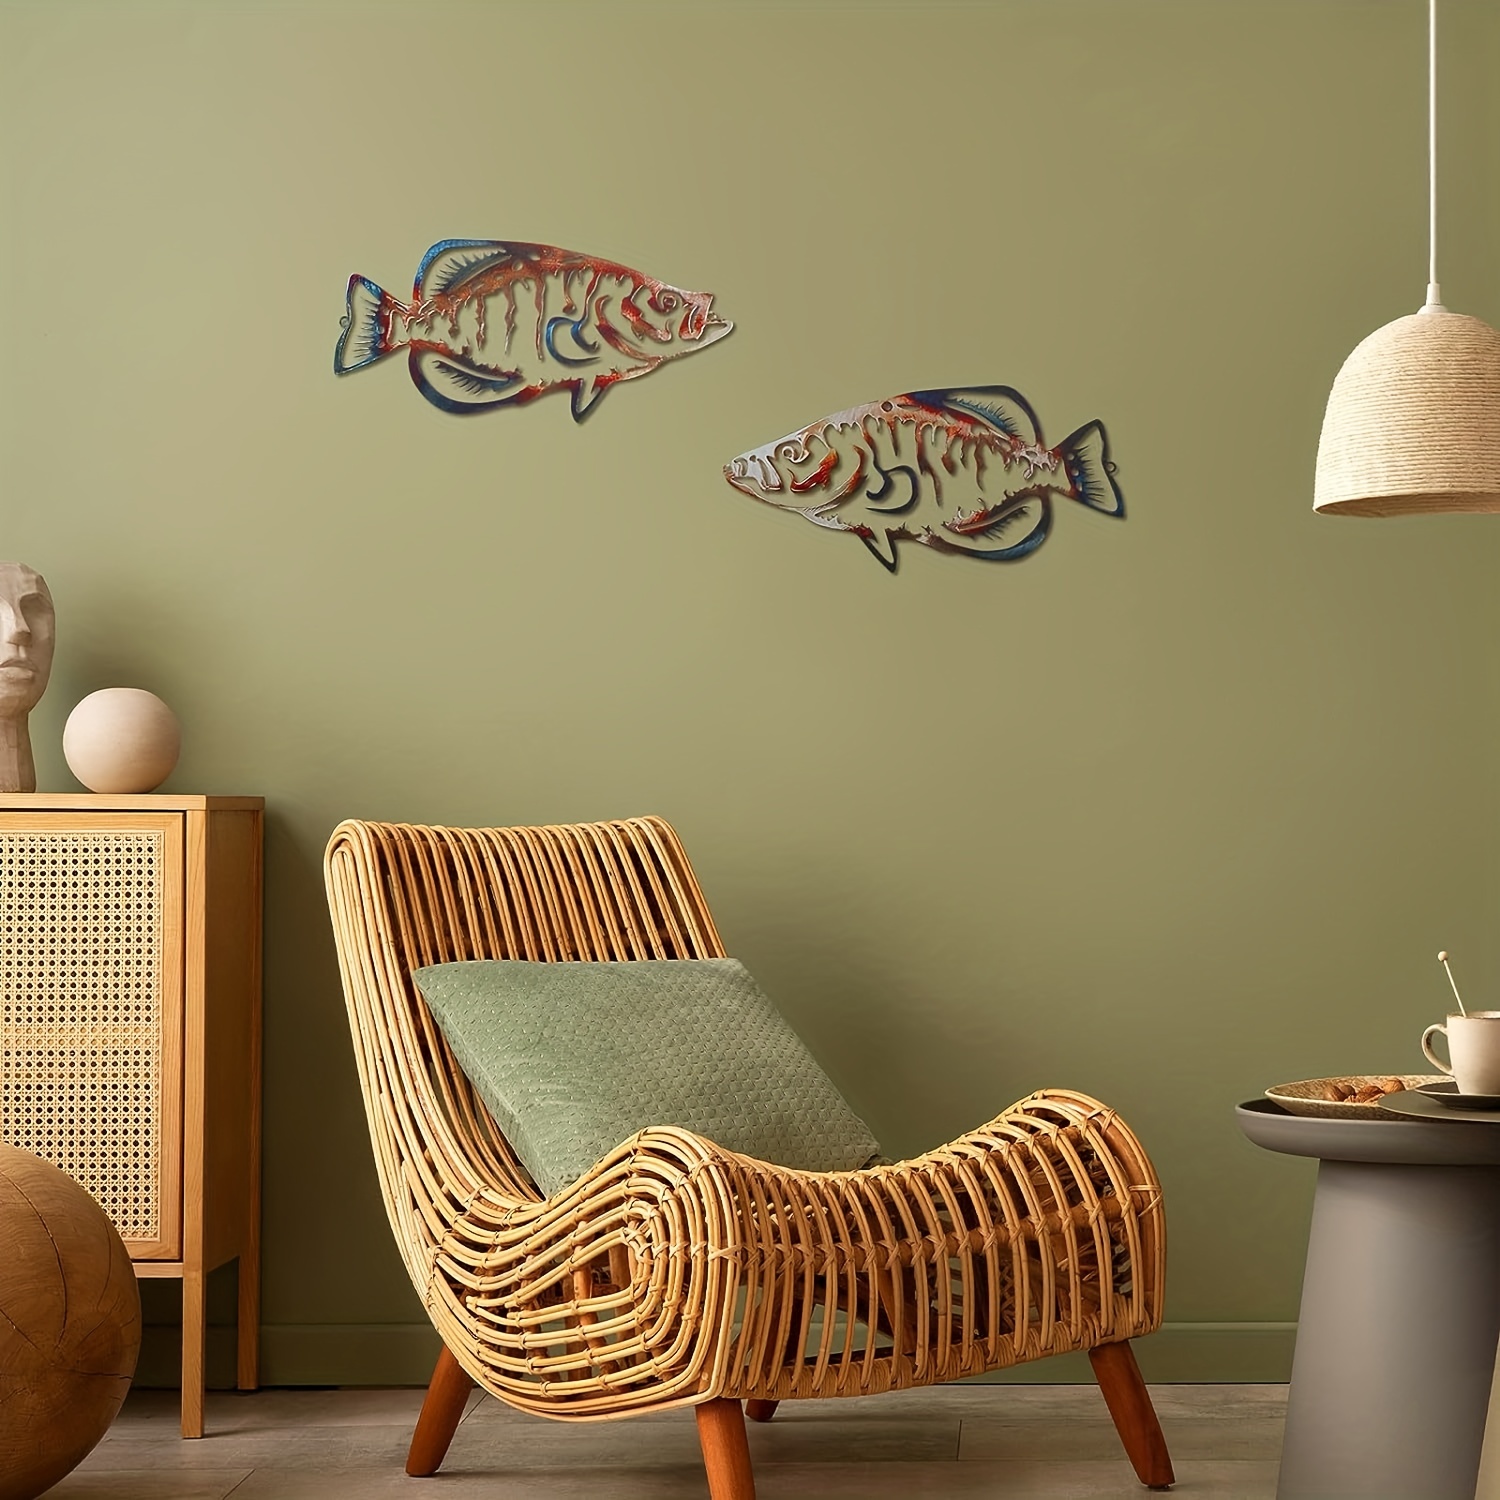 School of Fish Metal Wall Decor, 3D Metal Wall Art Fish, Vintage Wrought  Iron Art, Hanging Art Décor, Home Decoration for Boat Nautical Ocean,Small